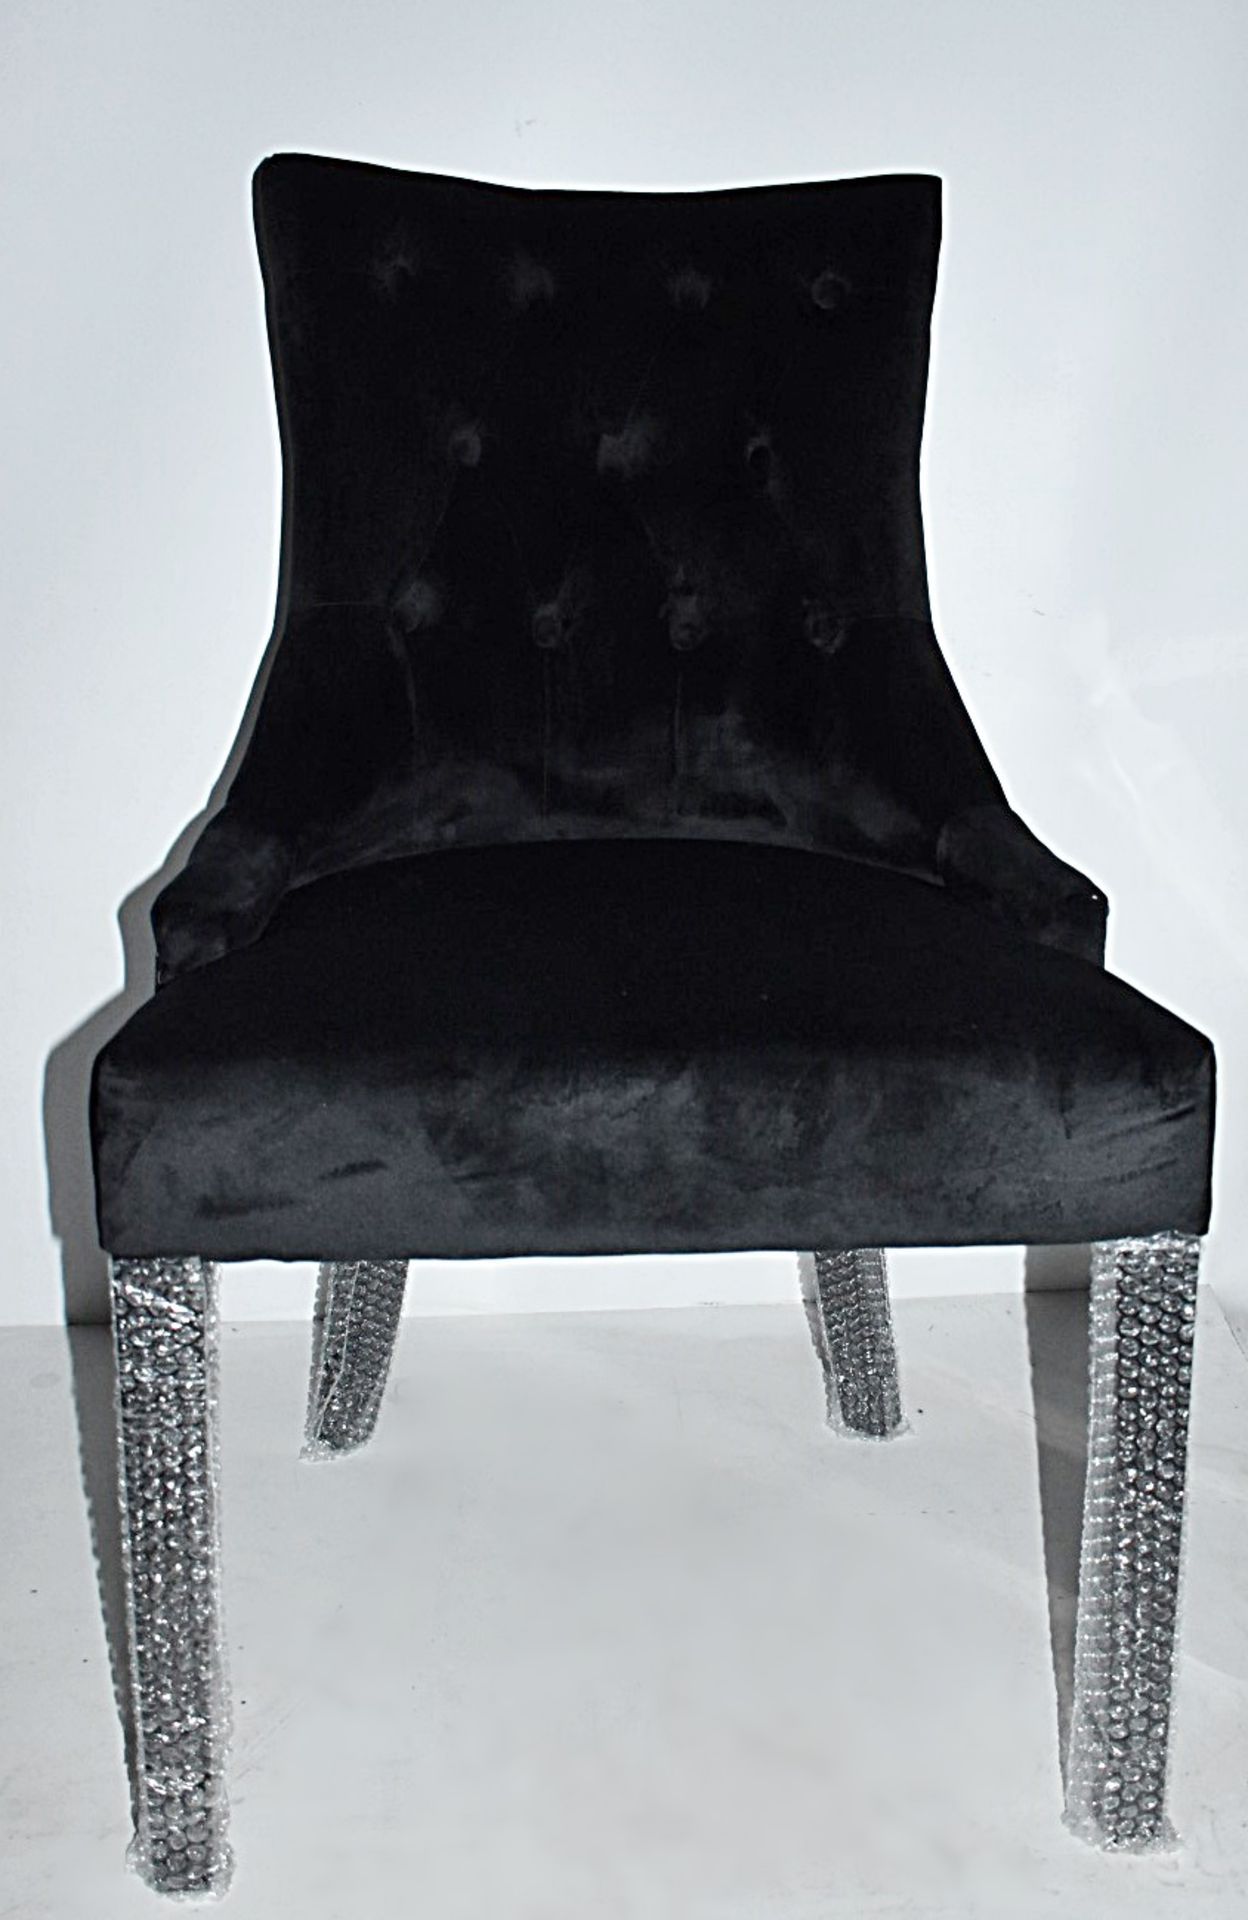 6 x HOUSE OF SPARKLES Luxury Vintage-style 'LION' Button-Back Dining Chairs Richly Upholstered In - Image 5 of 11